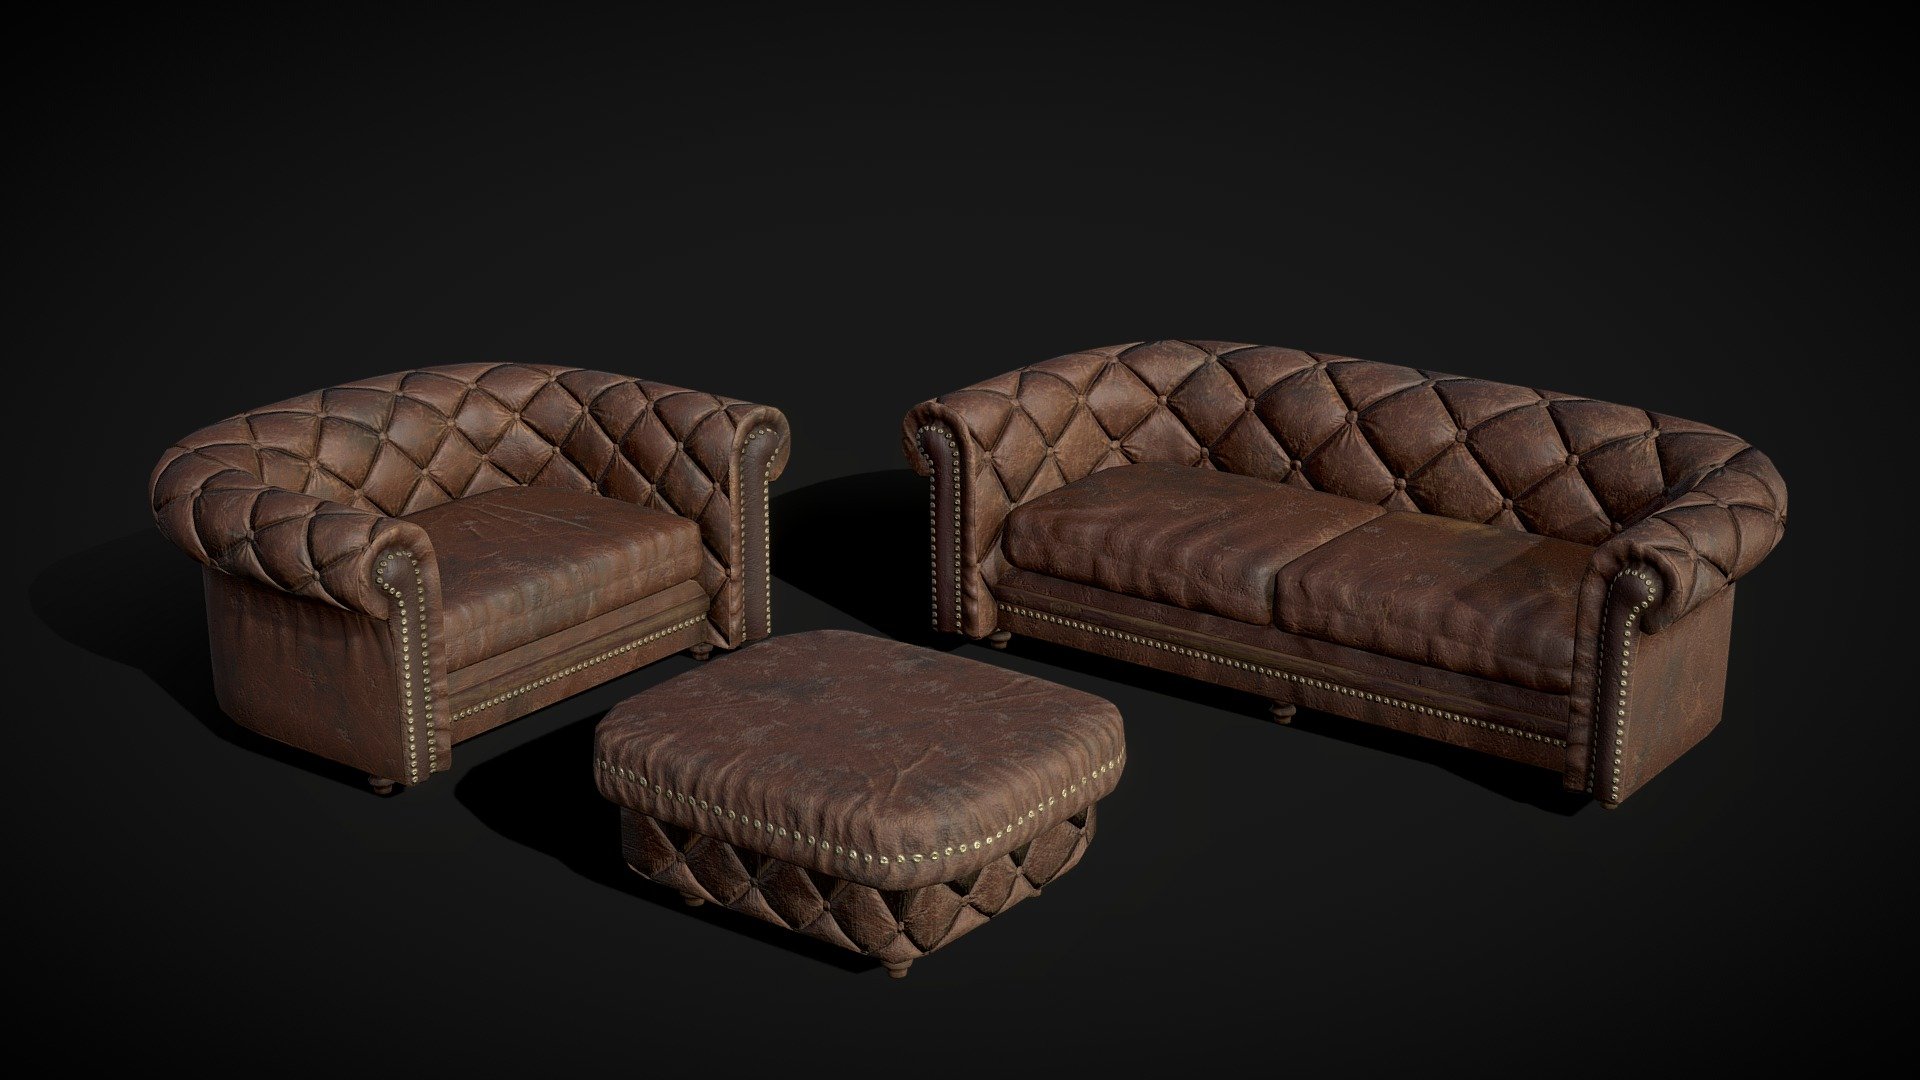 Low Poly Furniture Set / Leather Sofa, Armchair and Pouffe
includes a couch, chair and ottoman

4096x4096 PNG texture

Textures include:




Base Color

Normal

Roughness

Metalic

AO

Triangles: 7.7k
Vertices: 4k - Furniture Set -Leather Sofa, Armchair, Pouffe LP - Buy Royalty Free 3D model by Karolina Renkiewicz (@KarolinaRenkiewicz) 3d model